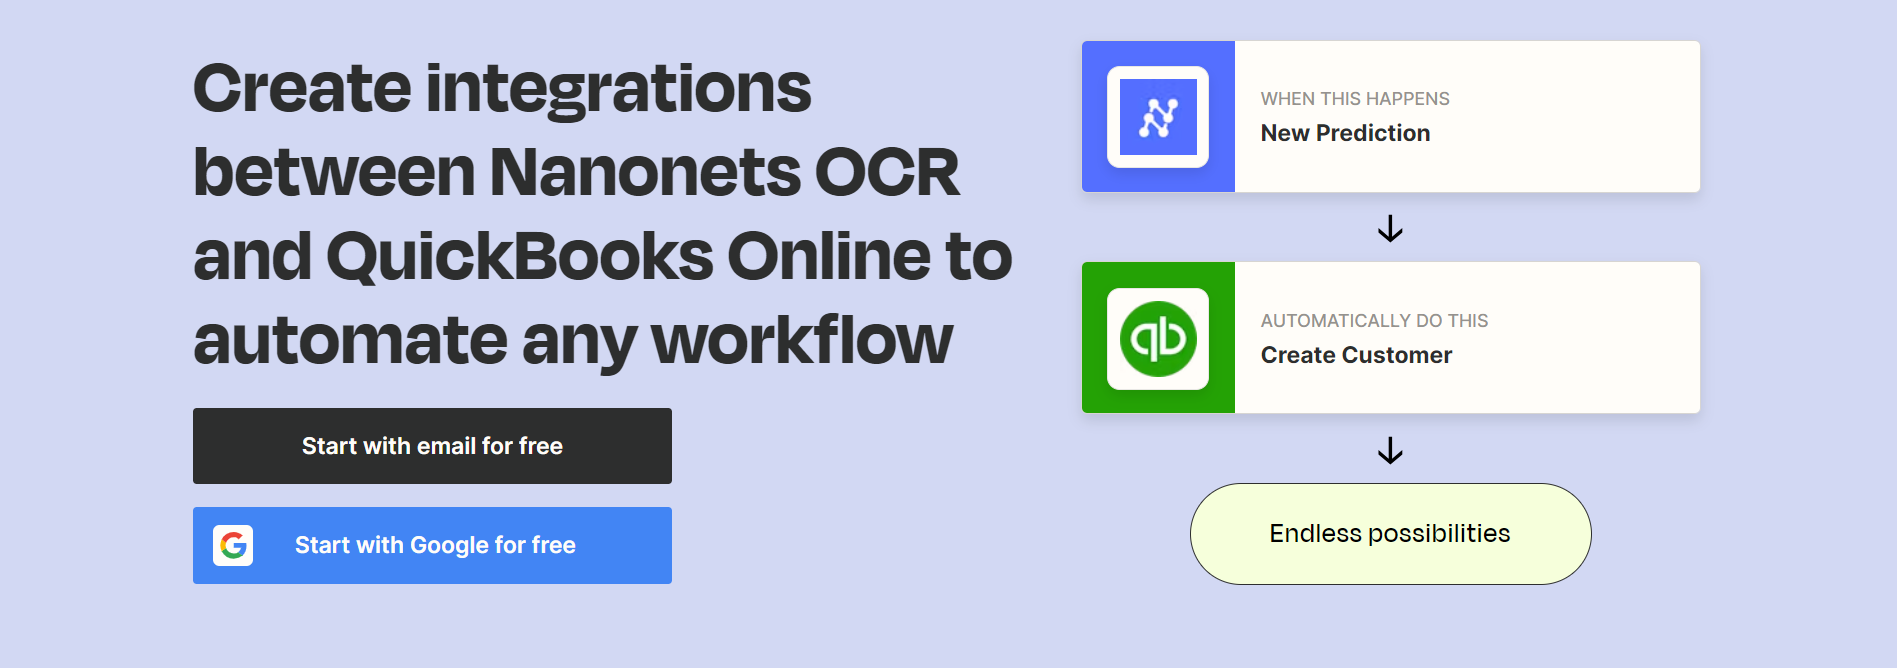  Automate workflows with Nanonets OCR and QuickBooks Online